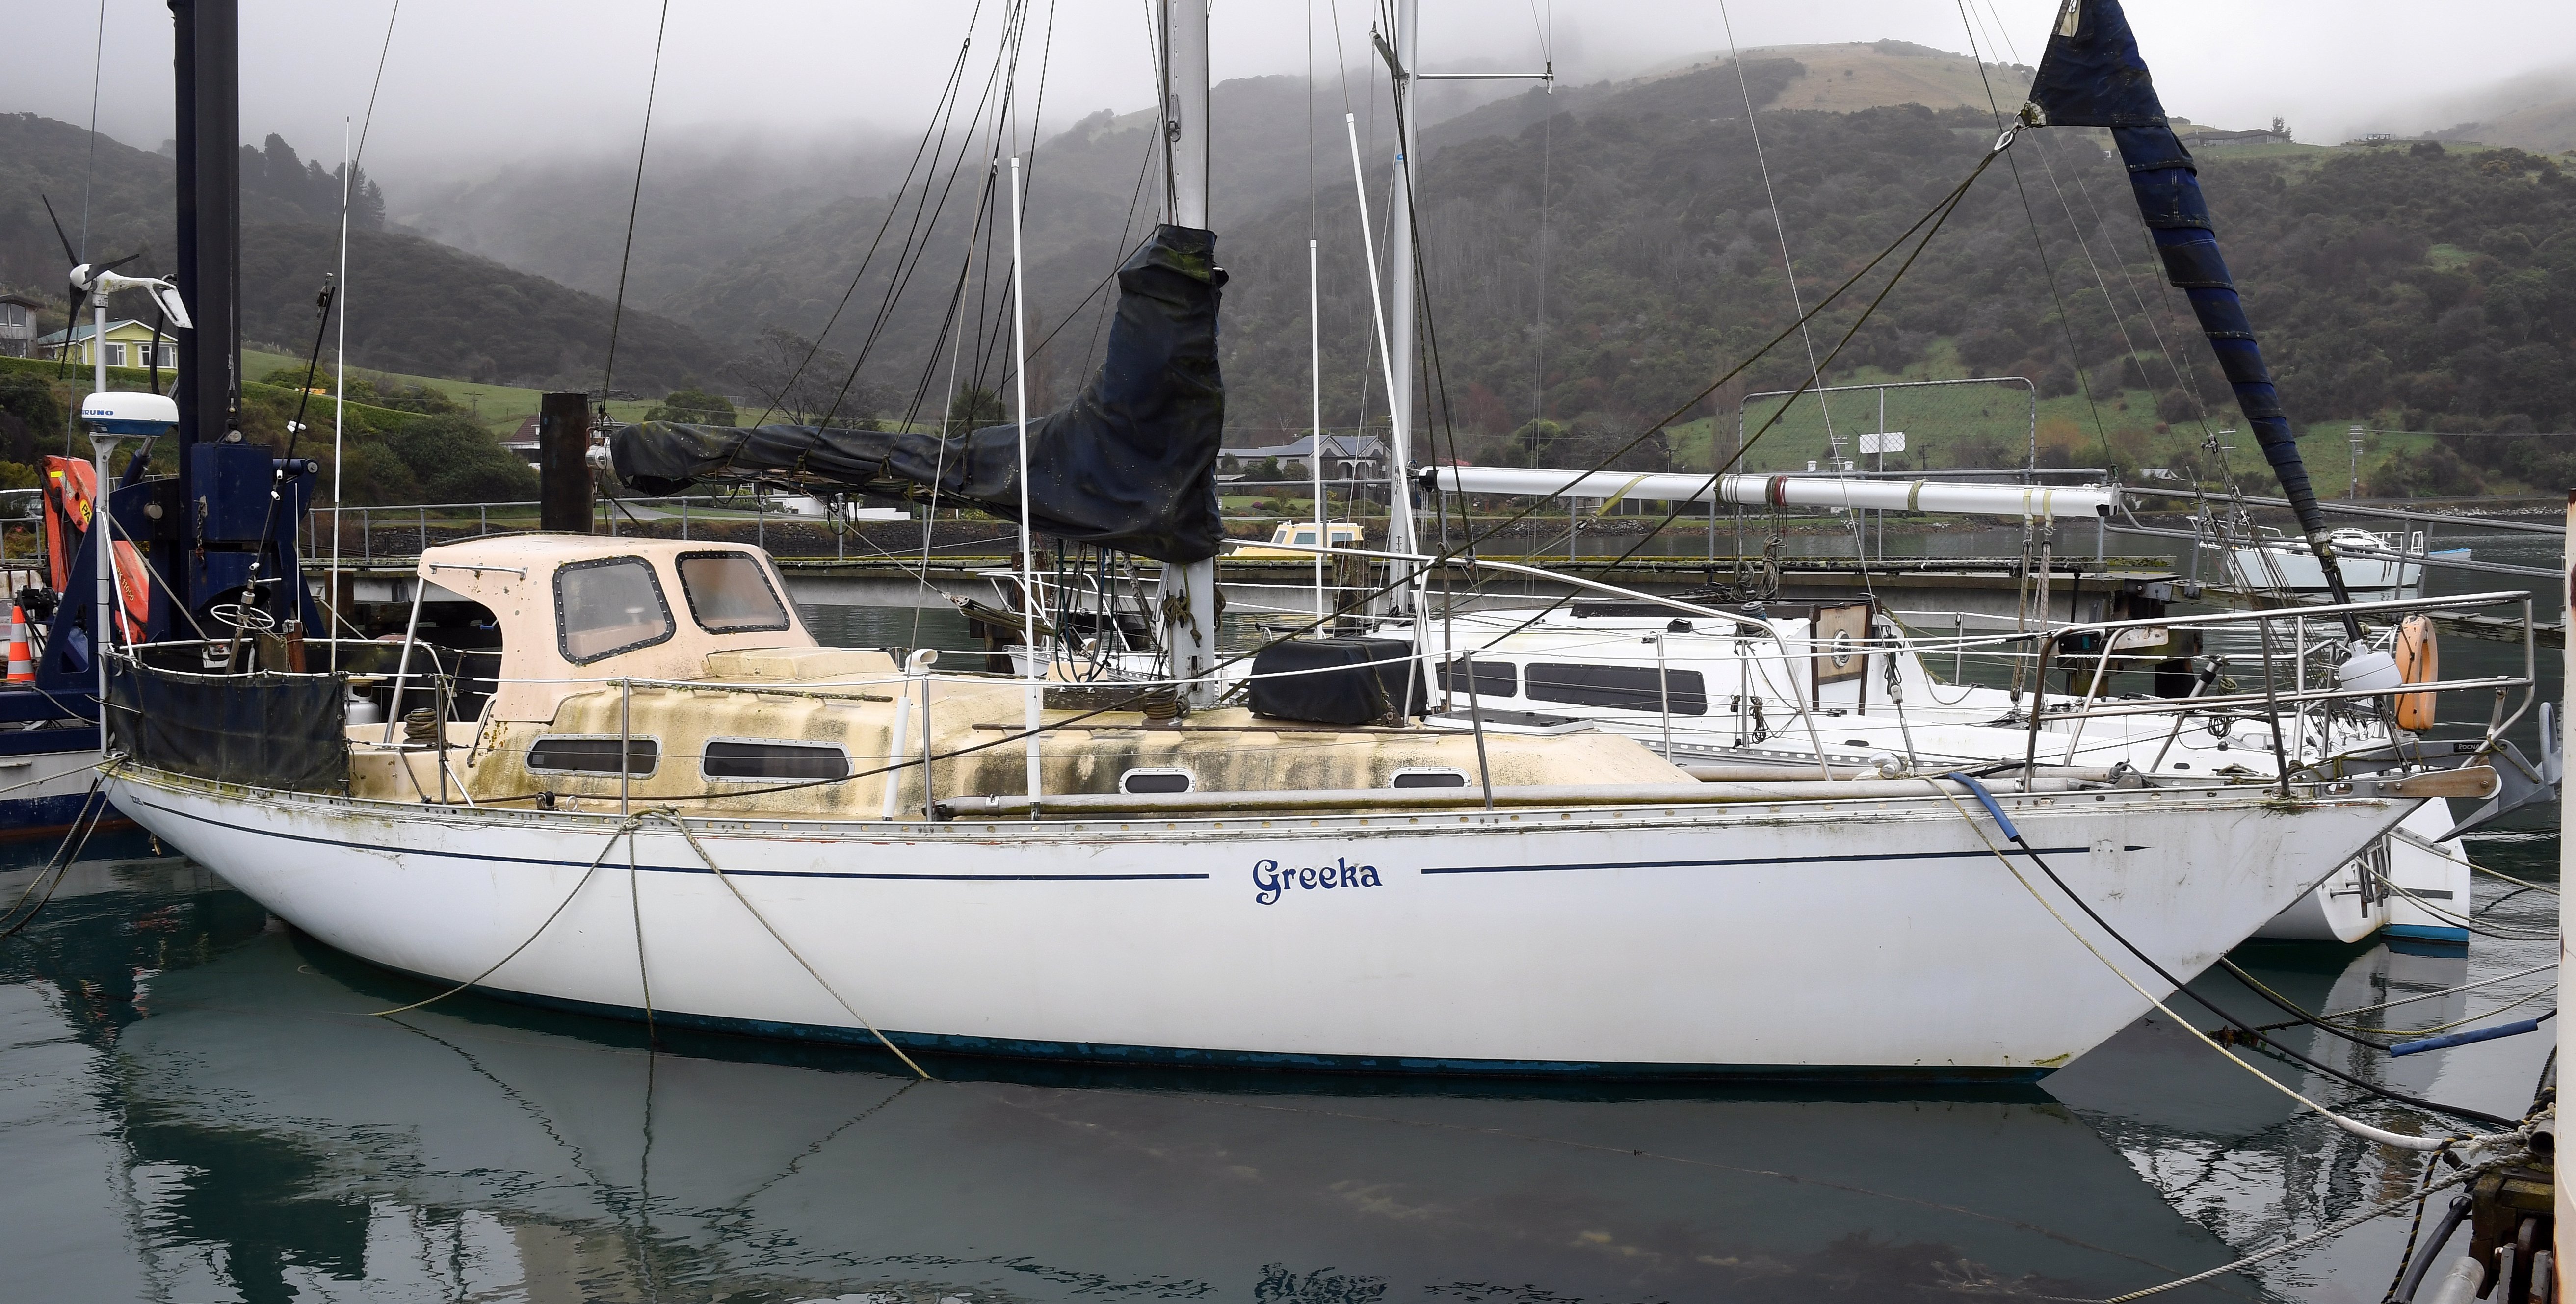 Greeka, the yacht at Deborah Bay owned by Murray Double, who was found  in the bay on Tuesday...